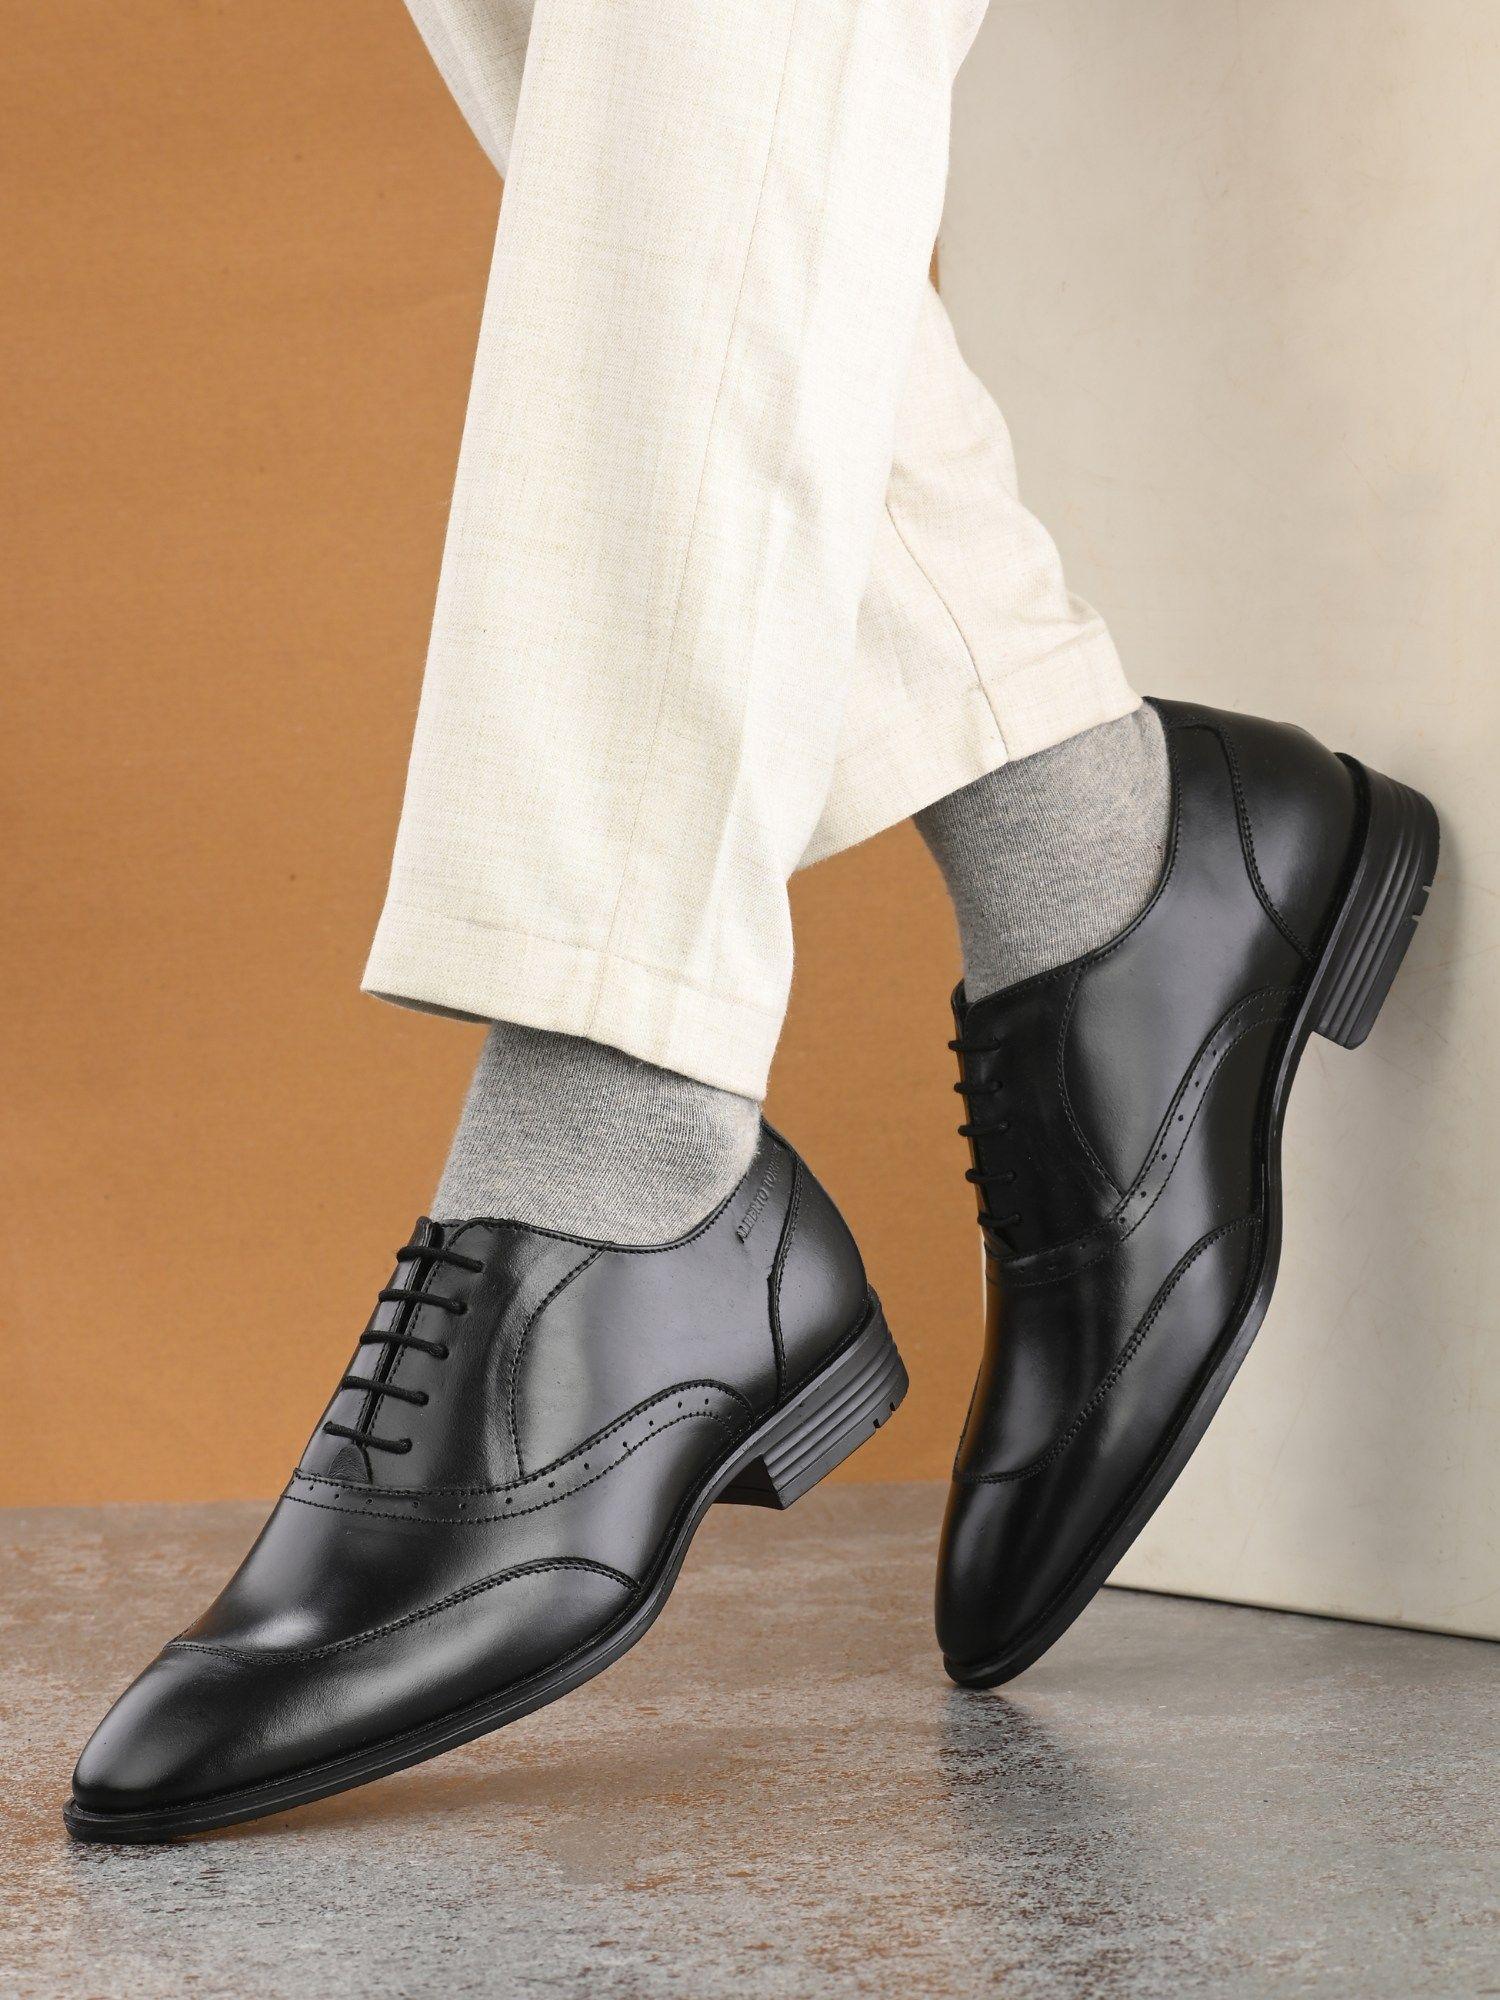 genuine leather black lace up formal oxford shoes for men